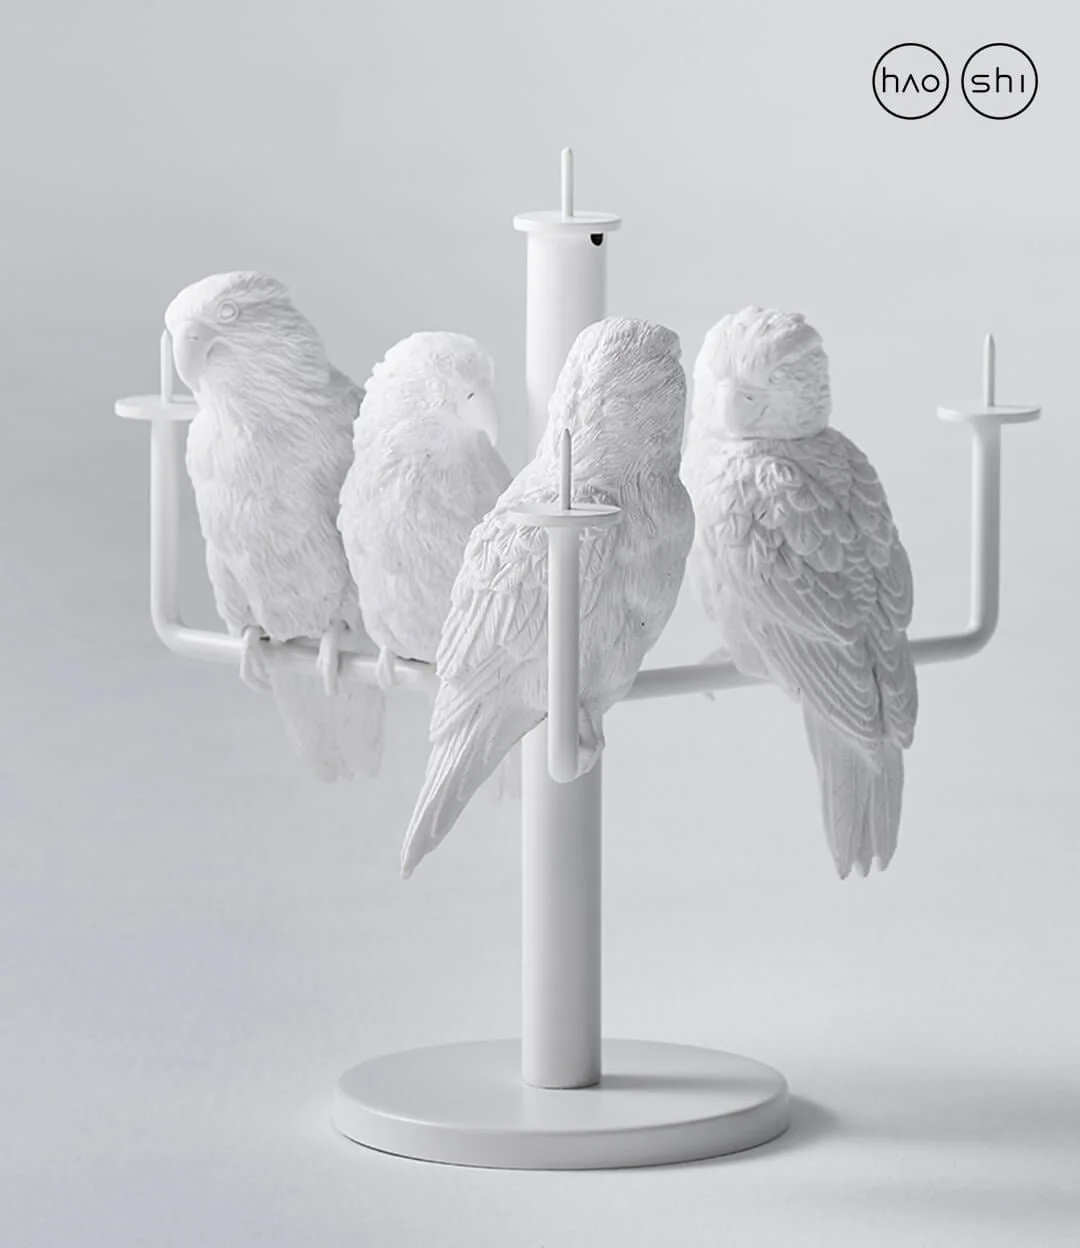 Parrot X CANDLE HOLDER – 4 Parrots by Haoshi 